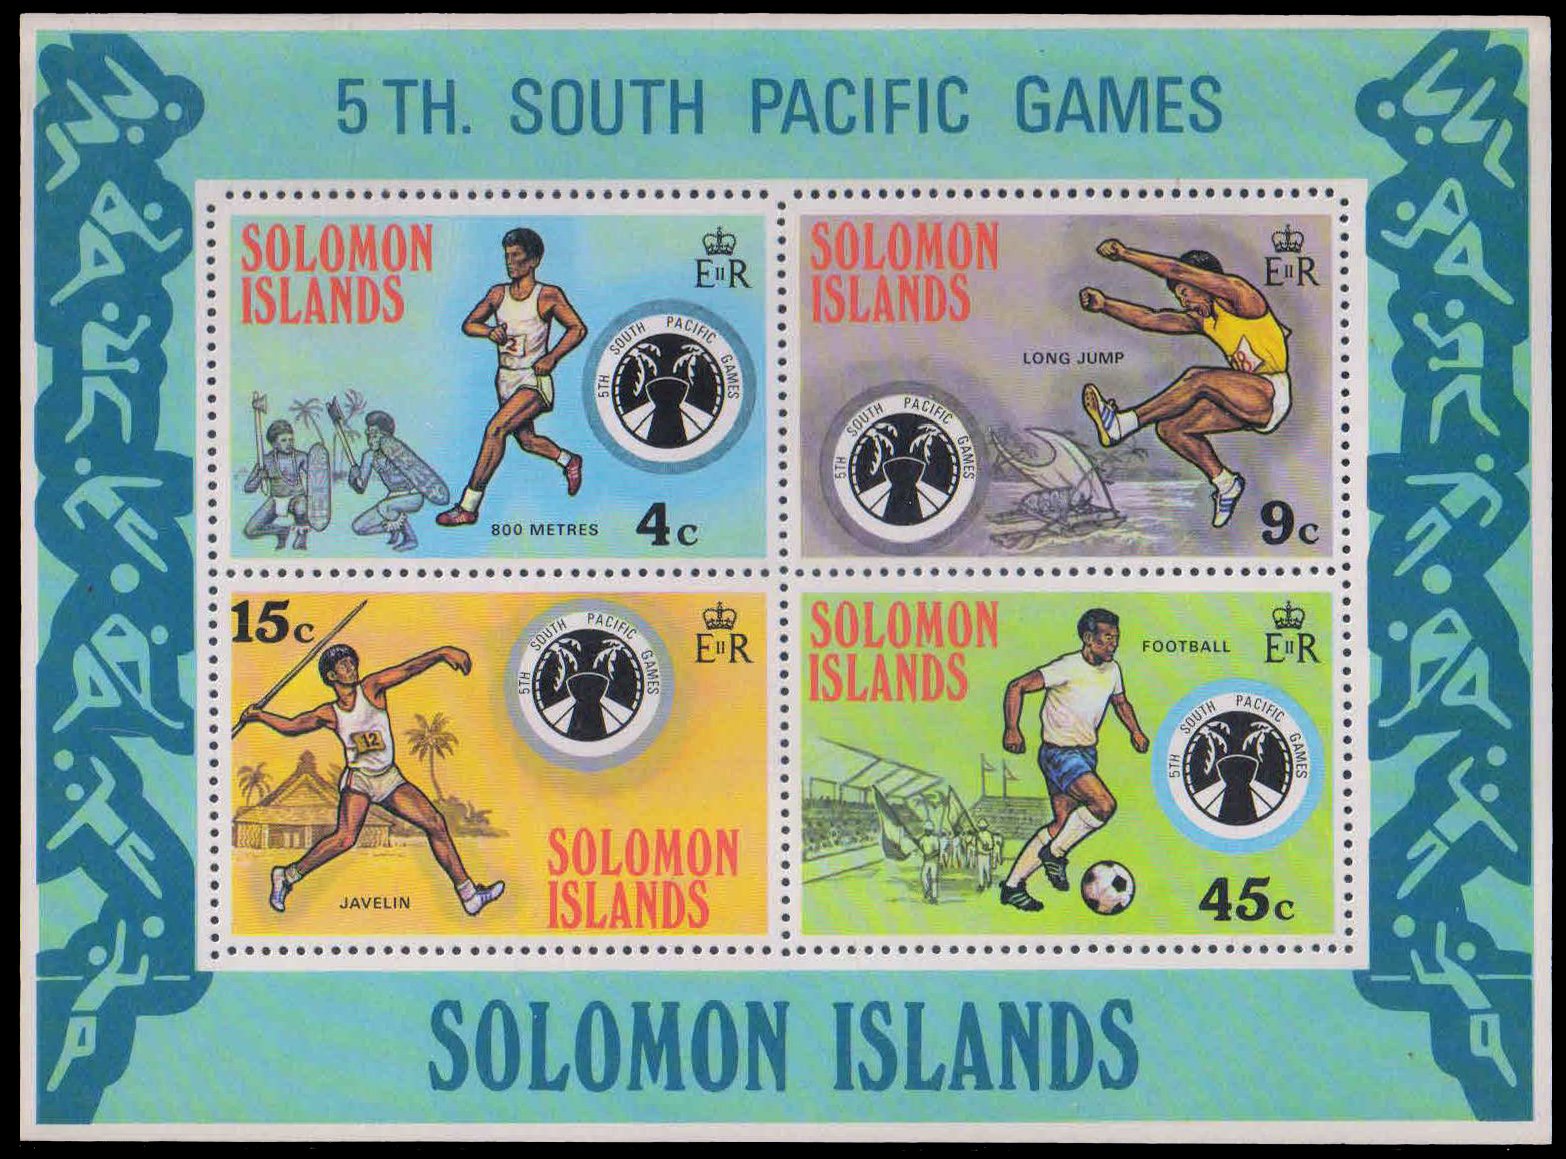 SOLOMON ISLANDS 1975-5th South Pacific Games, Long Jump, Football, Javelin Throwing, Sheet of 4, MNH, S.G. MS 280